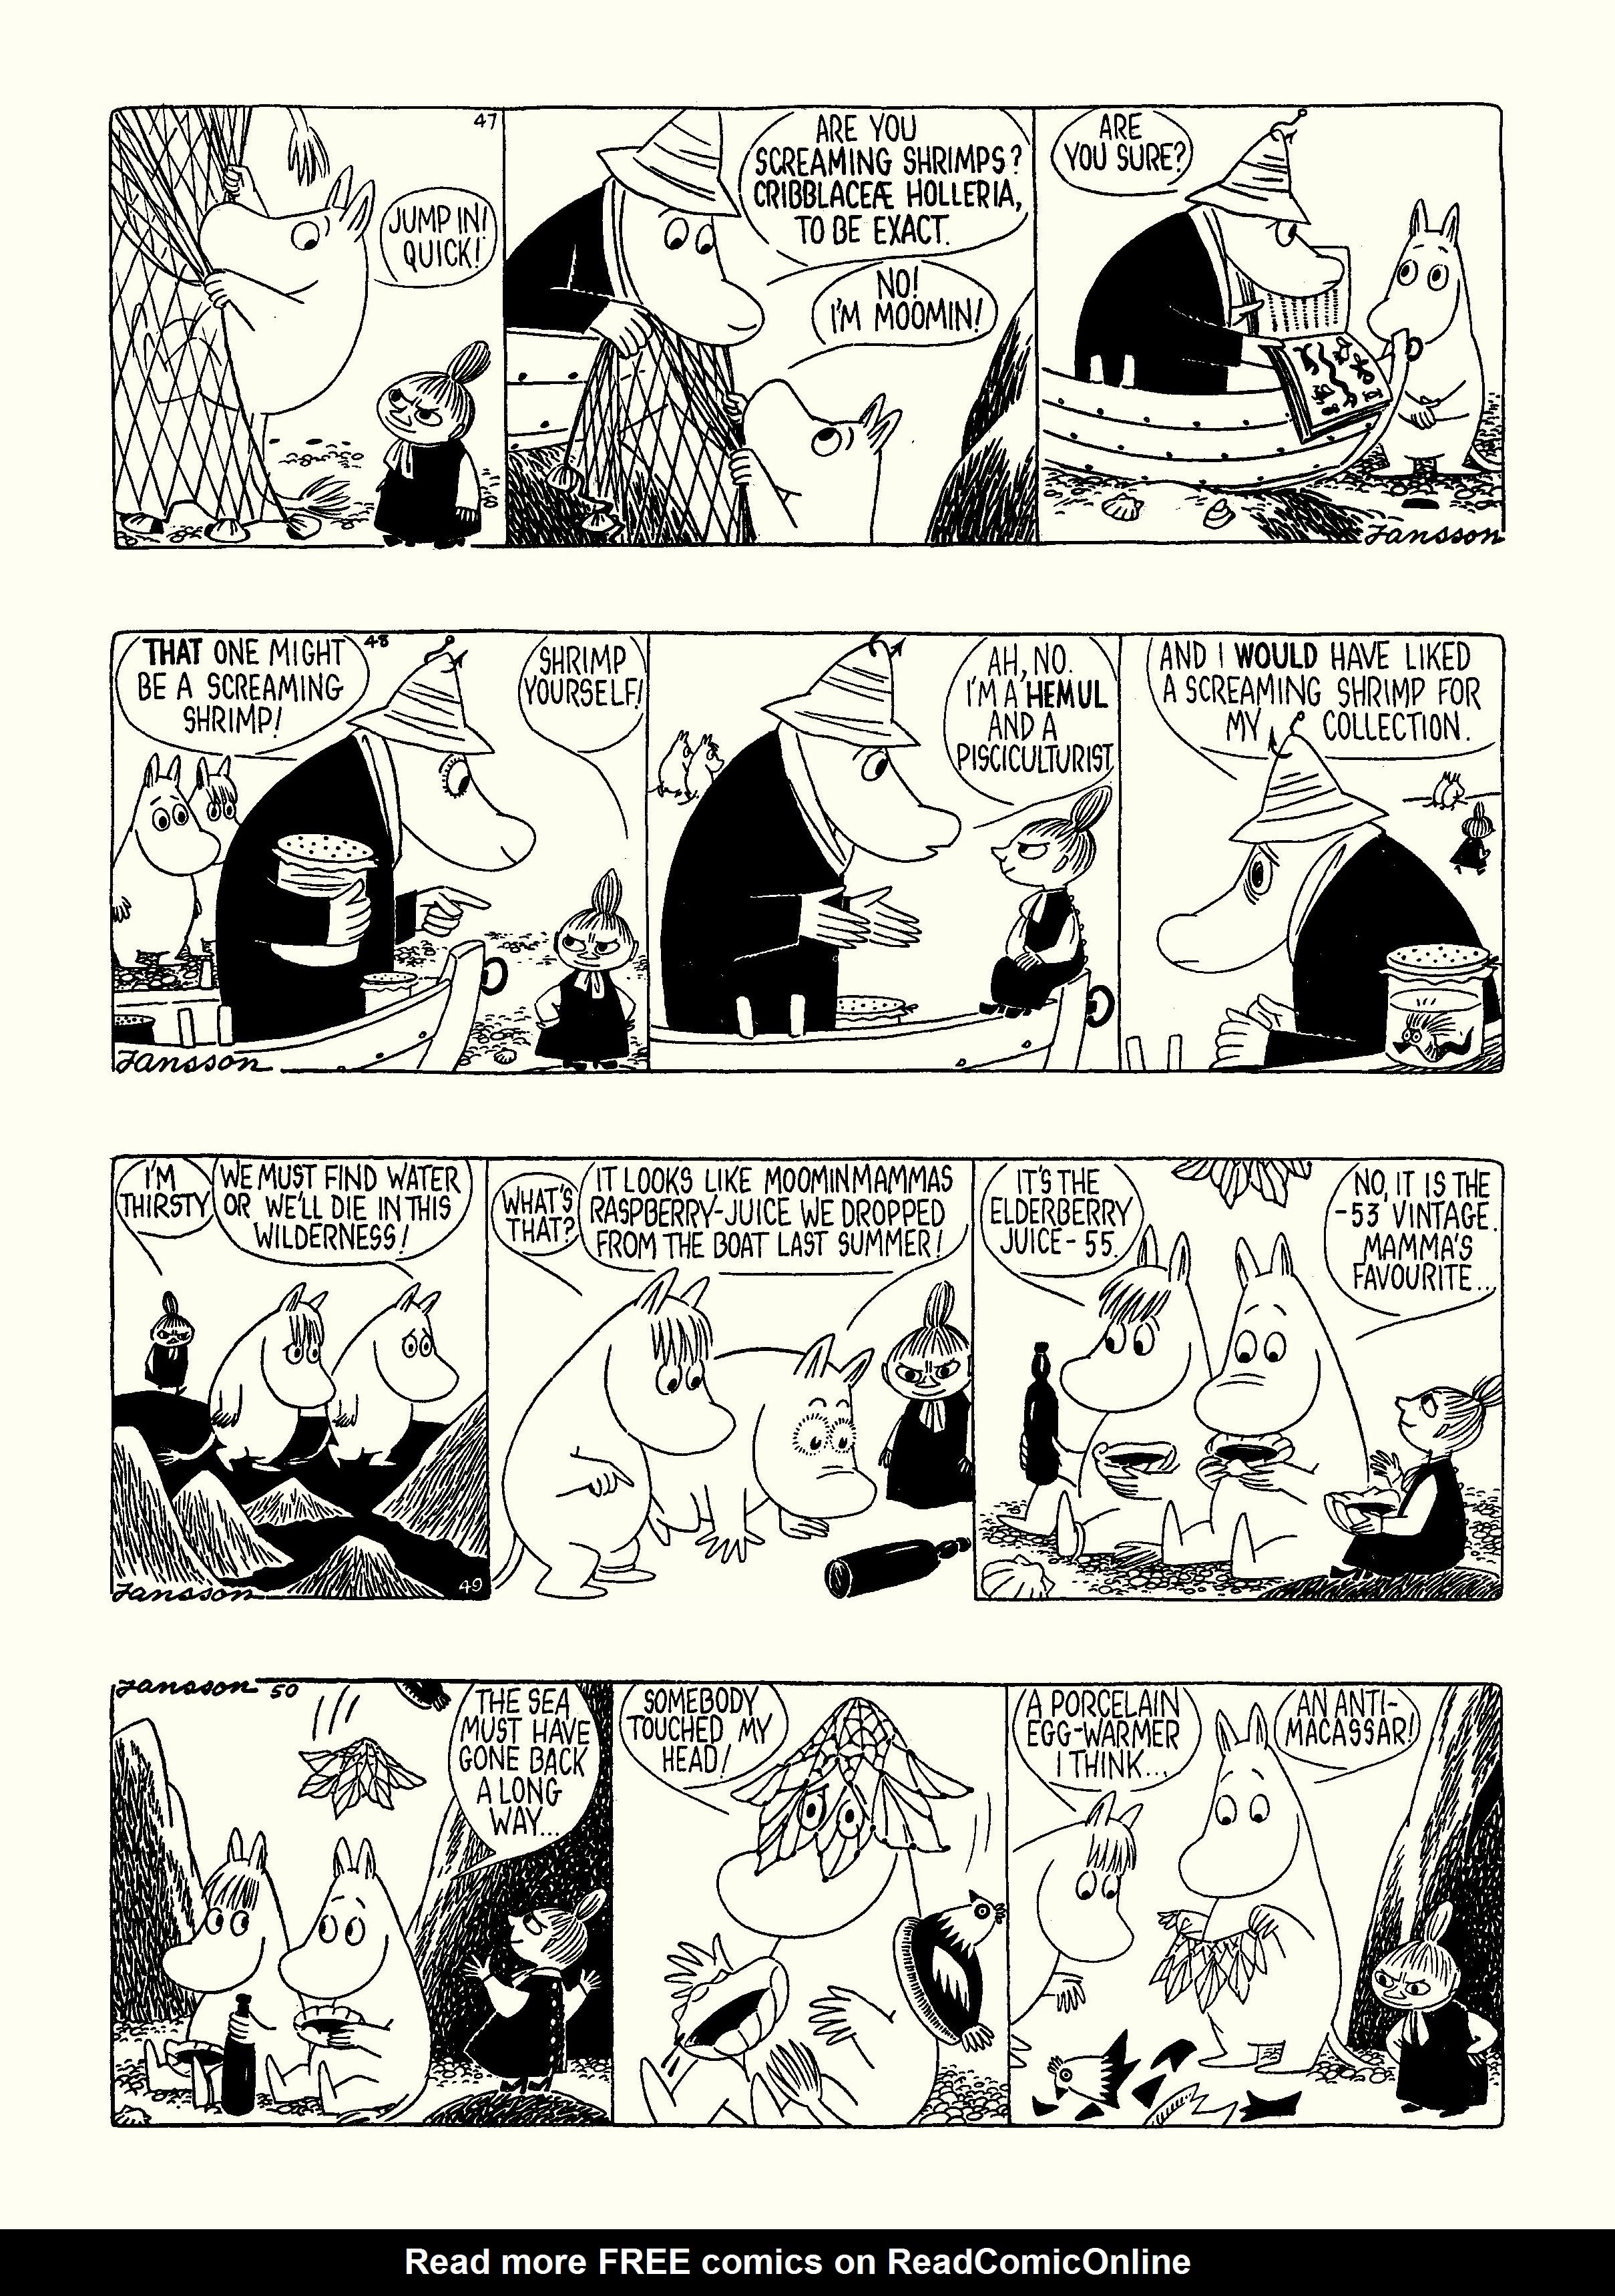 Read online Moomin: The Complete Tove Jansson Comic Strip comic -  Issue # TPB 4 - 70